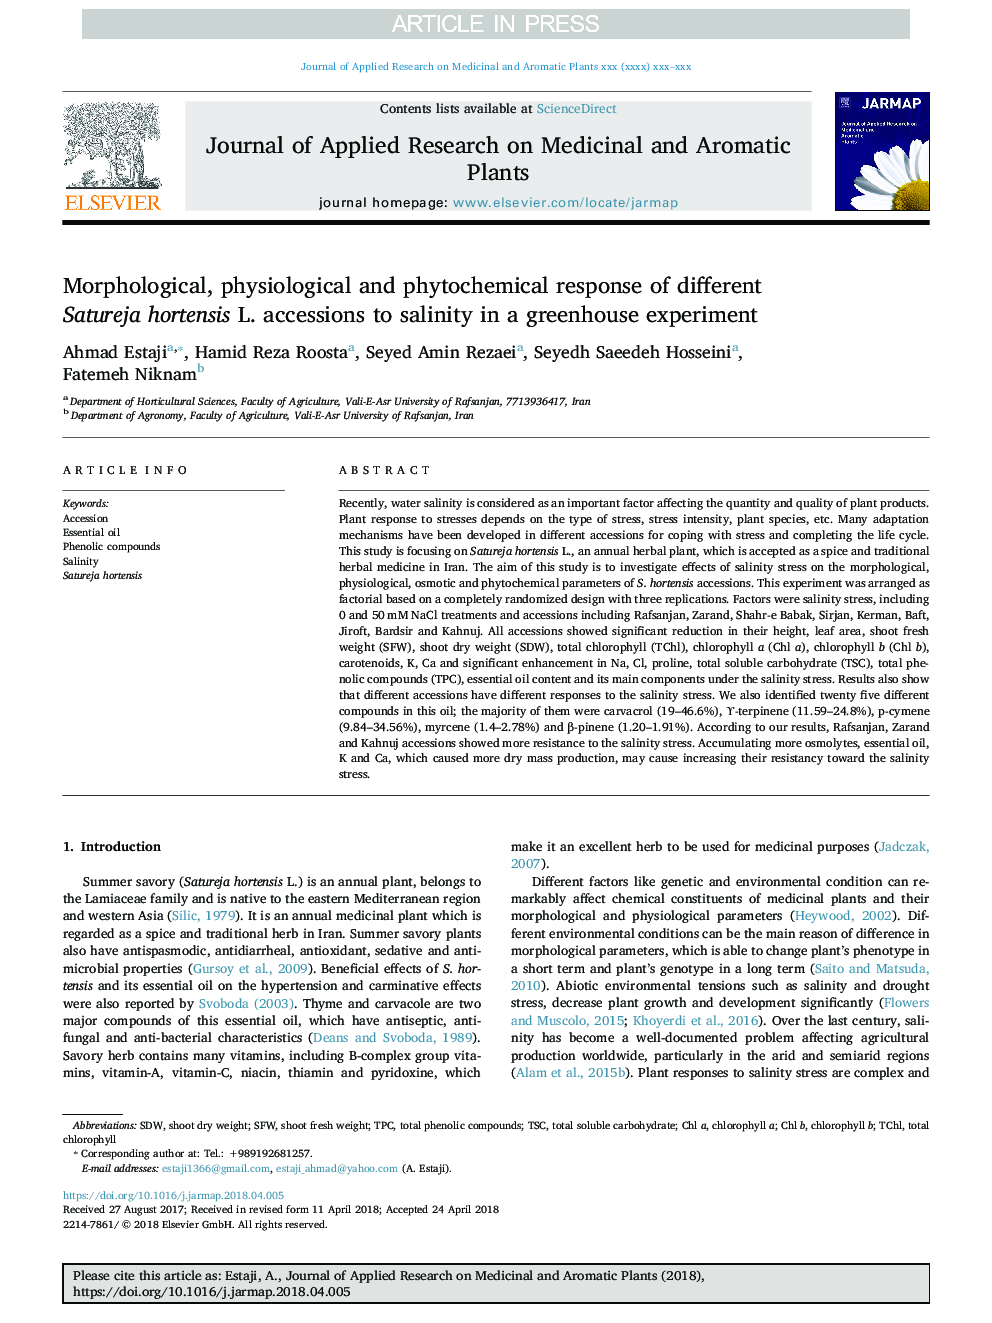 Morphological, physiological and phytochemical response of different Satureja hortensis L. accessions to salinity in a greenhouse experiment